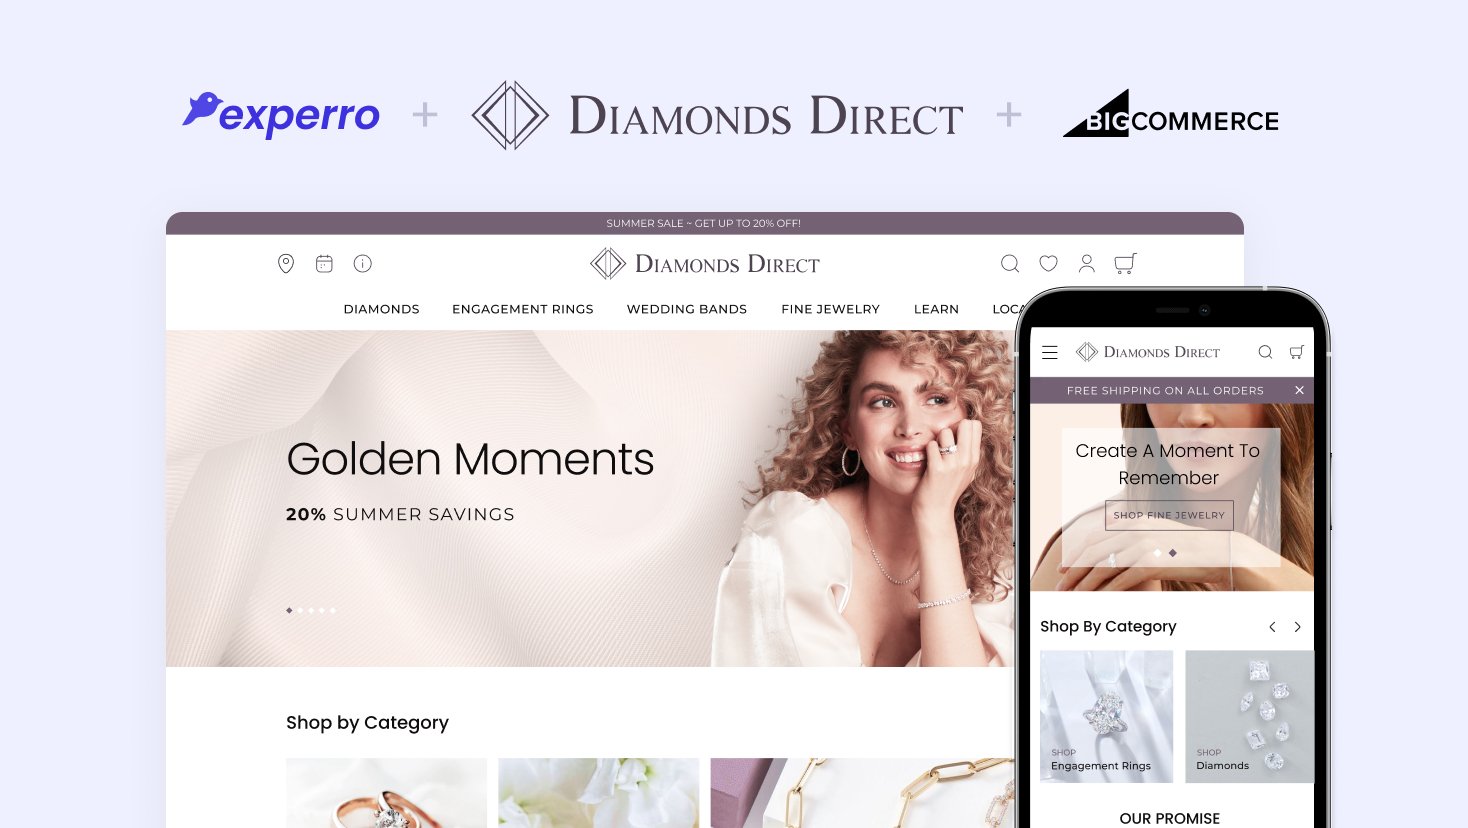 Diamonds Direct chooses Experro to build a personalized luxury shopping experience 